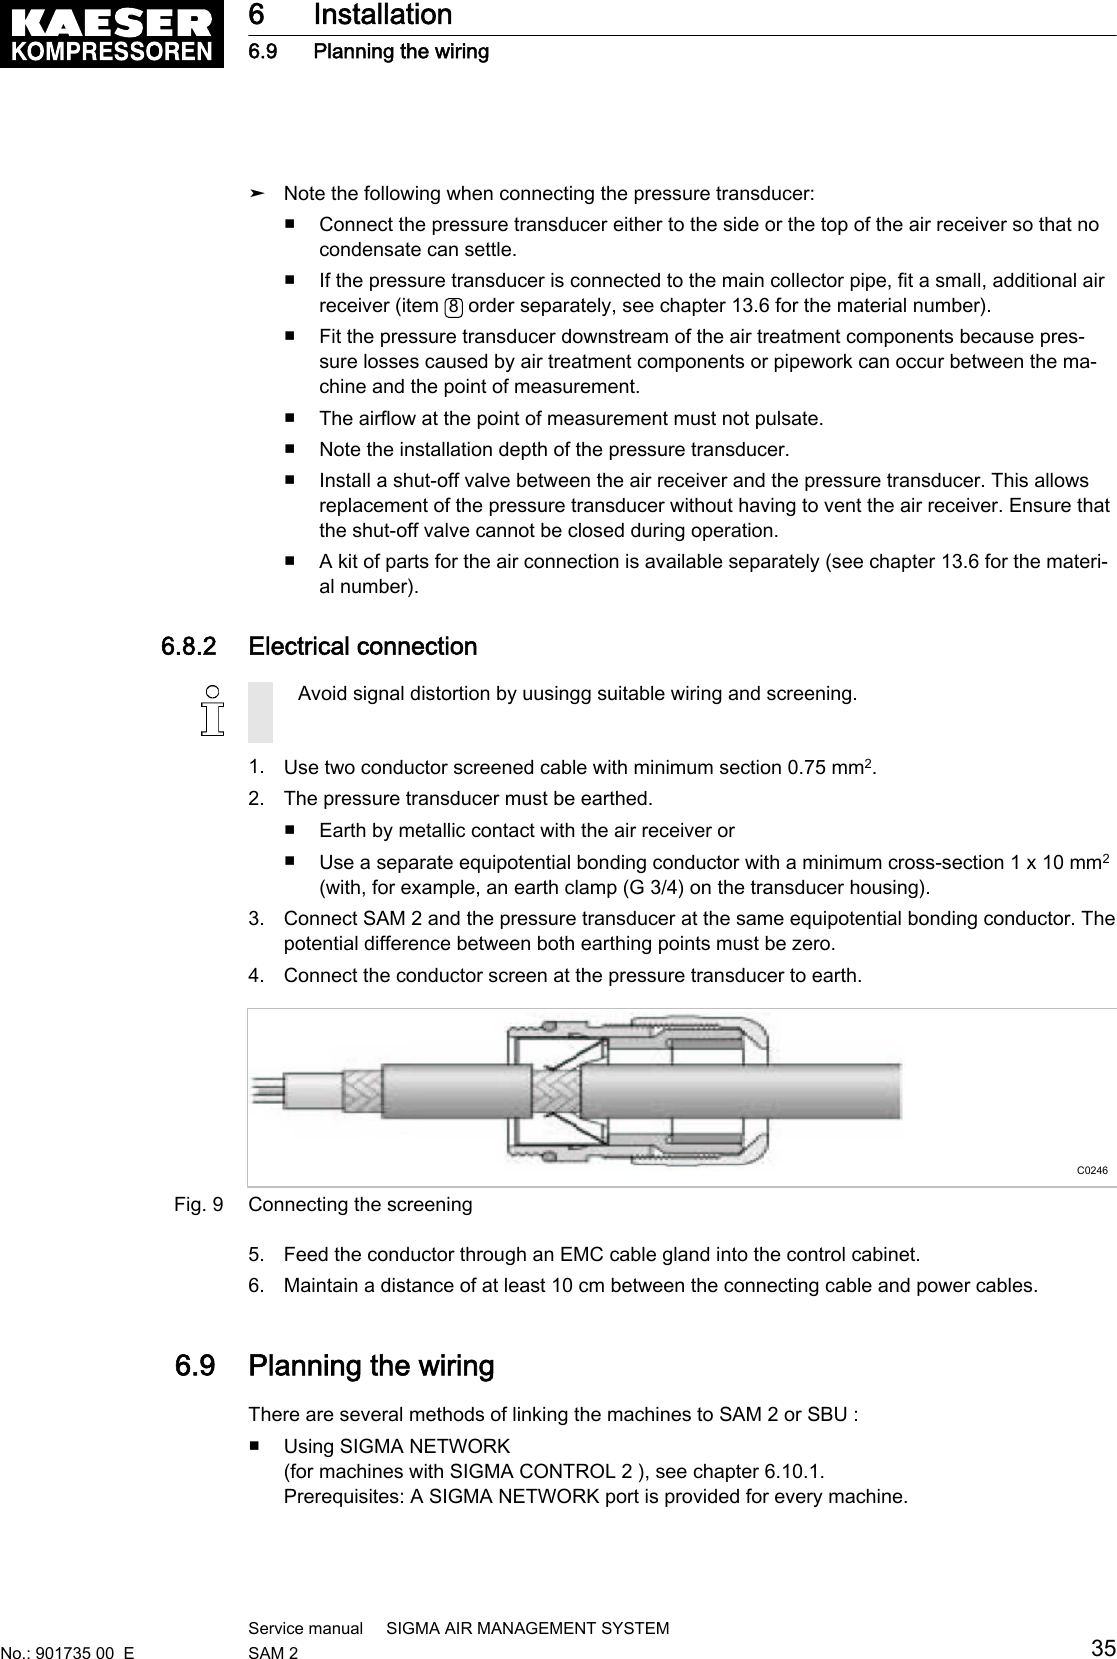 ➤ Note the following when connecting the pressure transducer:■ Connect the pressure transducer either to the side or the top of the air receiver so that nocondensate can settle.■ If the pressure transducer is connected to the main collector pipe, fit a small, additional airreceiver (item  8 order separately, see chapter 13.6 for the material number).■ Fit the pressure transducer downstream of the air treatment components because pres‐sure losses caused by air treatment components or pipework can occur between the ma‐chine and the point of measurement.■ The airflow at the point of measurement must not pulsate.■ Note the installation depth of the pressure transducer.■ Install a shut-off valve between the air receiver and the pressure transducer. This allowsreplacement of the pressure transducer without having to vent the air receiver. Ensure thatthe shut-off valve cannot be closed during operation.■ A kit of parts for the air connection is available separately (see chapter 13.6 for the materi‐al number).6.8.2  Electrical connectionAvoid signal distortion by uusingg suitable wiring and screening.1. Use two conductor screened cable with minimum section 0.75 mm2.2. The pressure transducer must be earthed.■ Earth by metallic contact with the air receiver or■Use a separate equipotential bonding conductor with a minimum cross-section 1 x 10 mm2(with, for example, an earth clamp (G 3/4) on the transducer housing).3. Connect SAM 2 and the pressure transducer at the same equipotential bonding conductor. Thepotential difference between both earthing points must be zero.4. Connect the conductor screen at the pressure transducer to earth.C0246Fig. 9 Connecting the screening5. Feed the conductor through an EMC cable gland into the control cabinet.6. Maintain a distance of at least 10 cm between the connecting cable and power cables.6.9  Planning the wiringThere are several methods of linking the machines to SAM 2 or SBU :■ Using SIGMA NETWORK(for machines with SIGMA CONTROL 2 ), see chapter 6.10.1.Prerequisites: A SIGMA NETWORK port is provided for every machine.6 Installation6.9 Planning the wiringNo.: 901735 00  EService manual     SIGMA AIR MANAGEMENT SYSTEMSAM 2  35